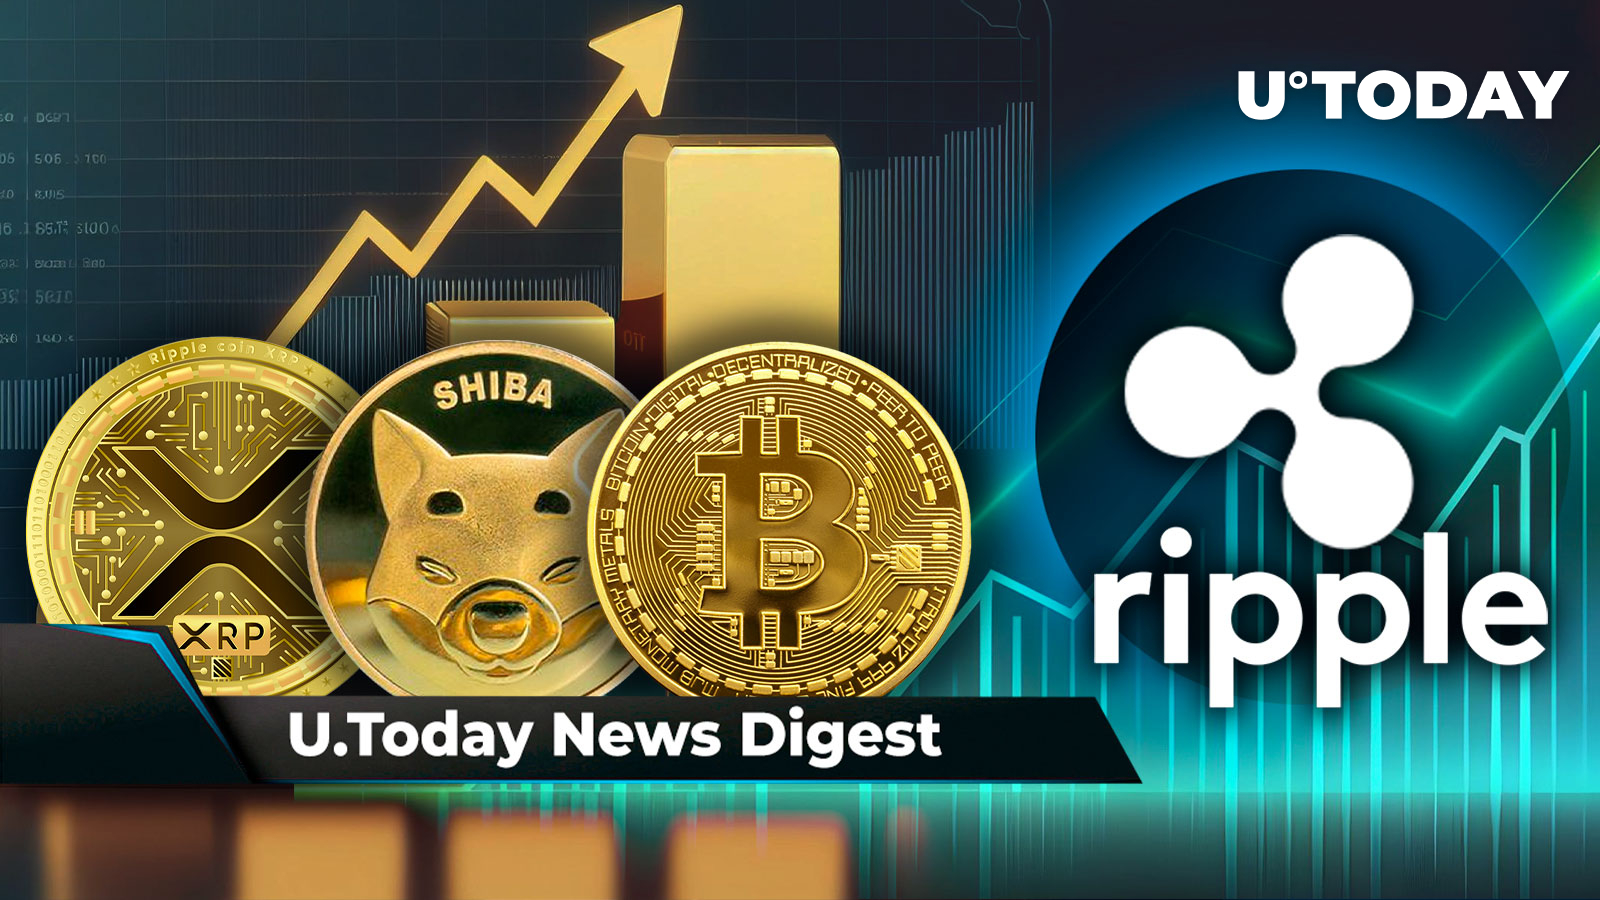 XRP, SHIB and BTC Adoption Surges Thanks to New Partnership, Ripple’s Top Execs Show New Trial Schedule, SHIB Hits New Milestone: Crypto News Digest by U.Today